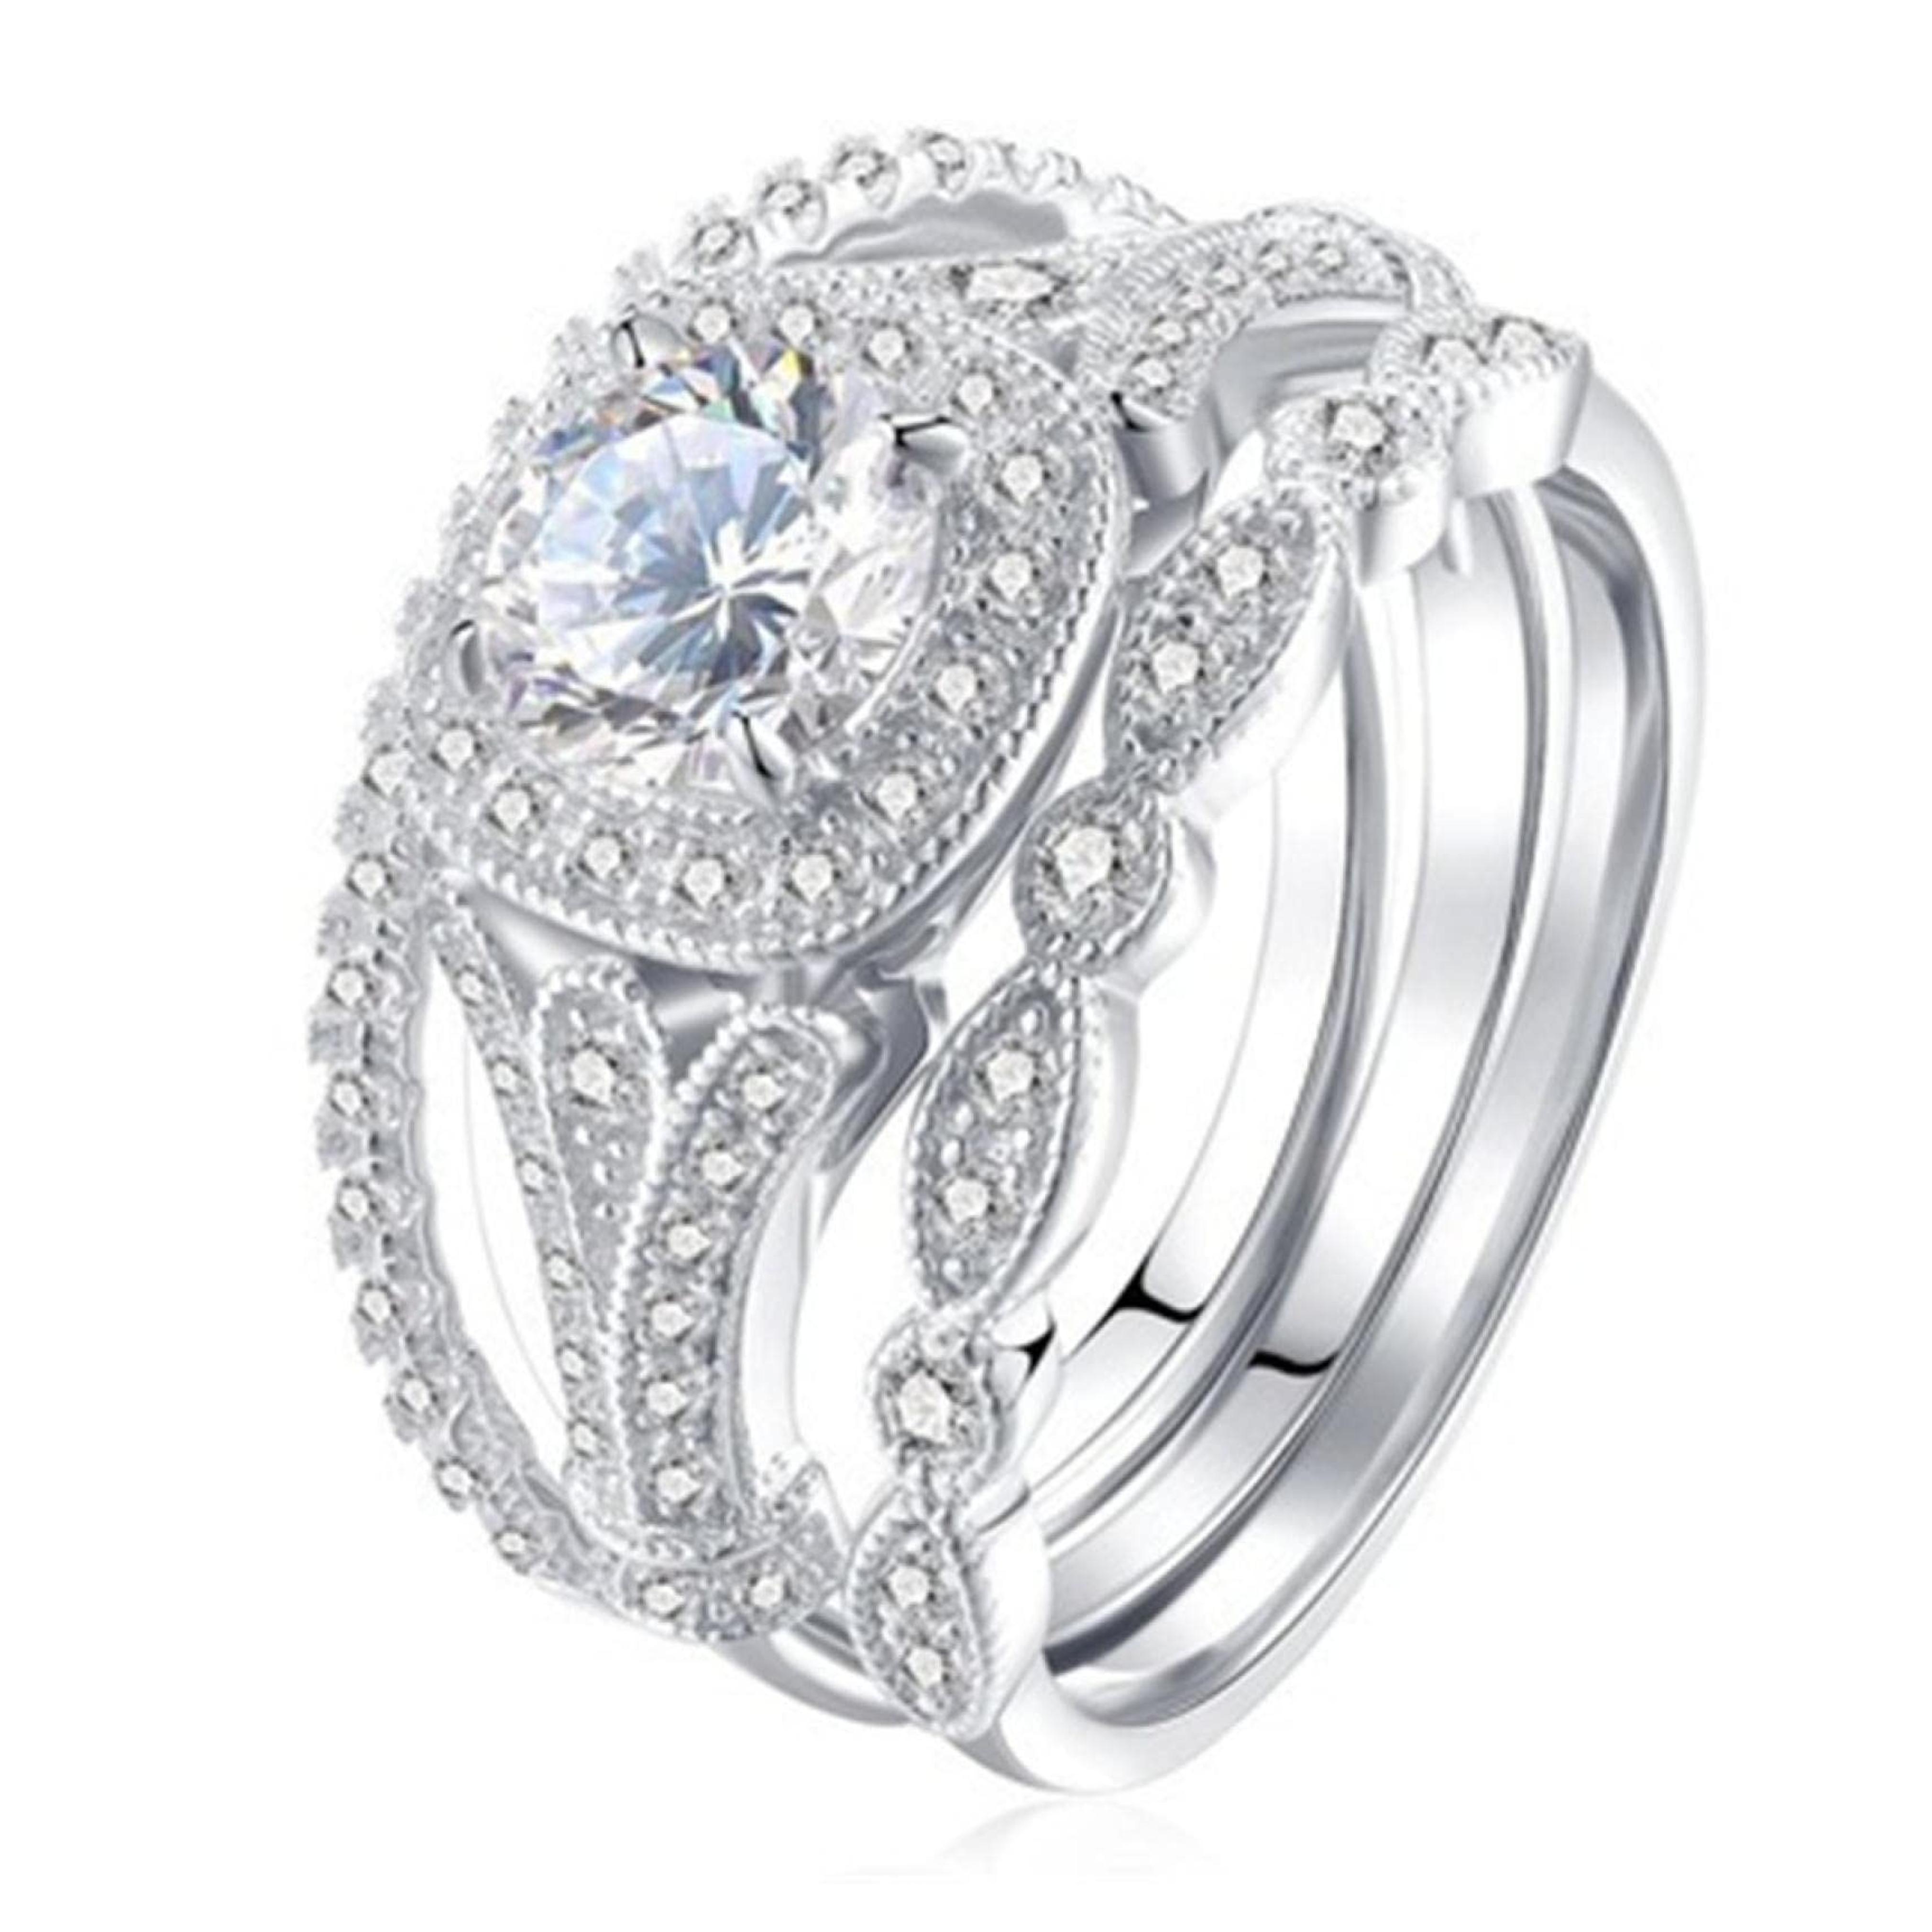 ILH Clearance Deals Rings,Sterling Silver Ring Womens Diamond Engagement Wedding ...